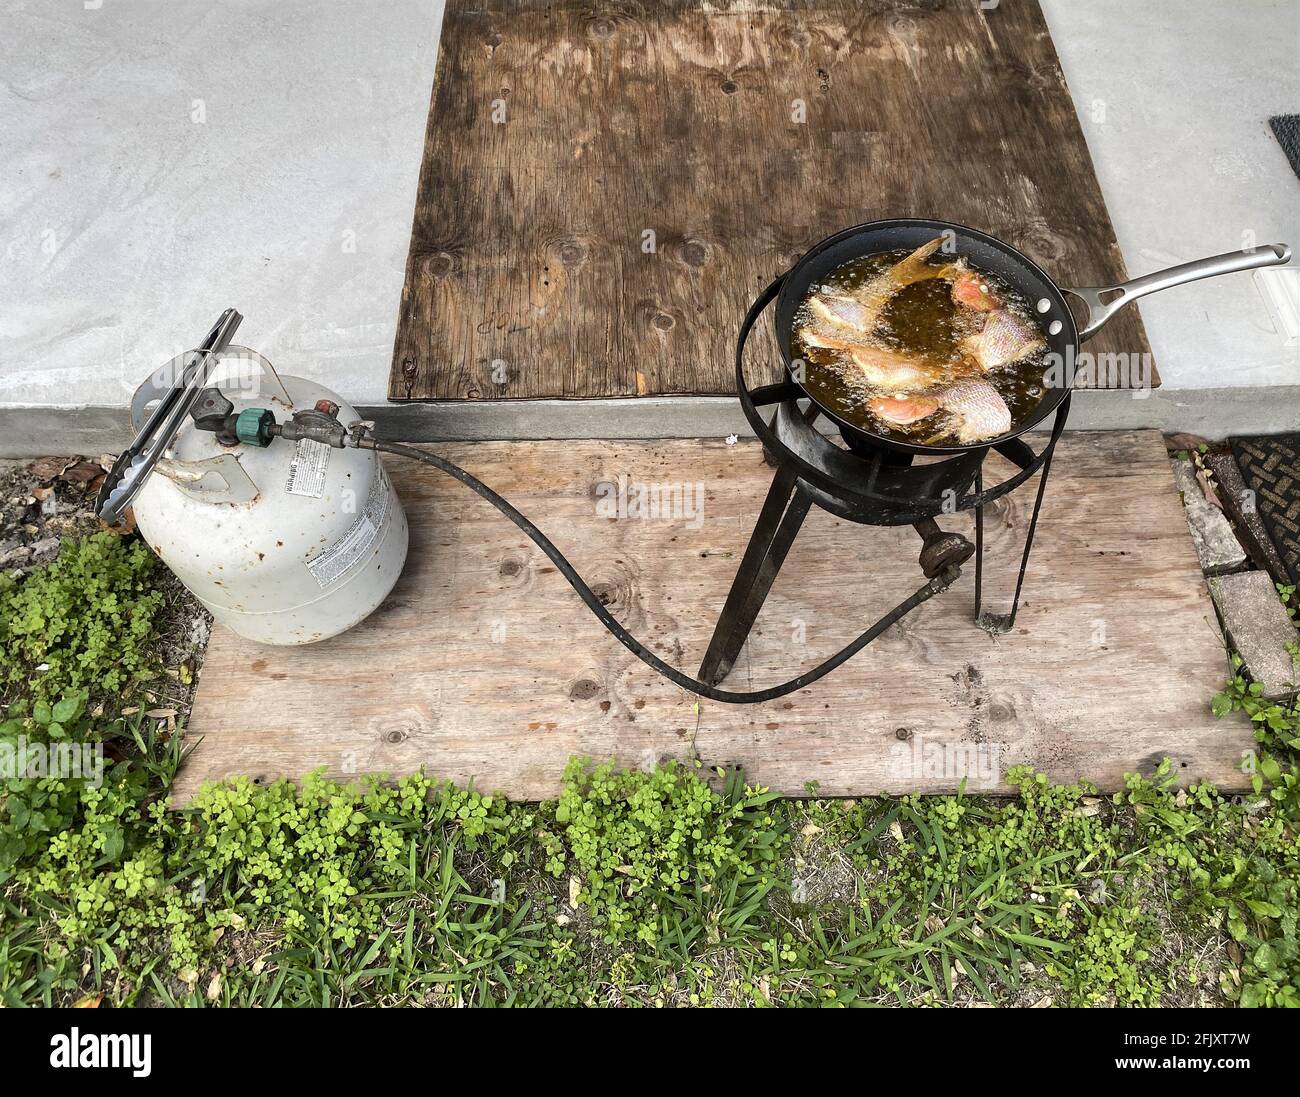 Frying fish in a frying pan with oil in an outdoor setting, for dinner. A propane tank is used to heat the oil and cook the trout. Stock Photo